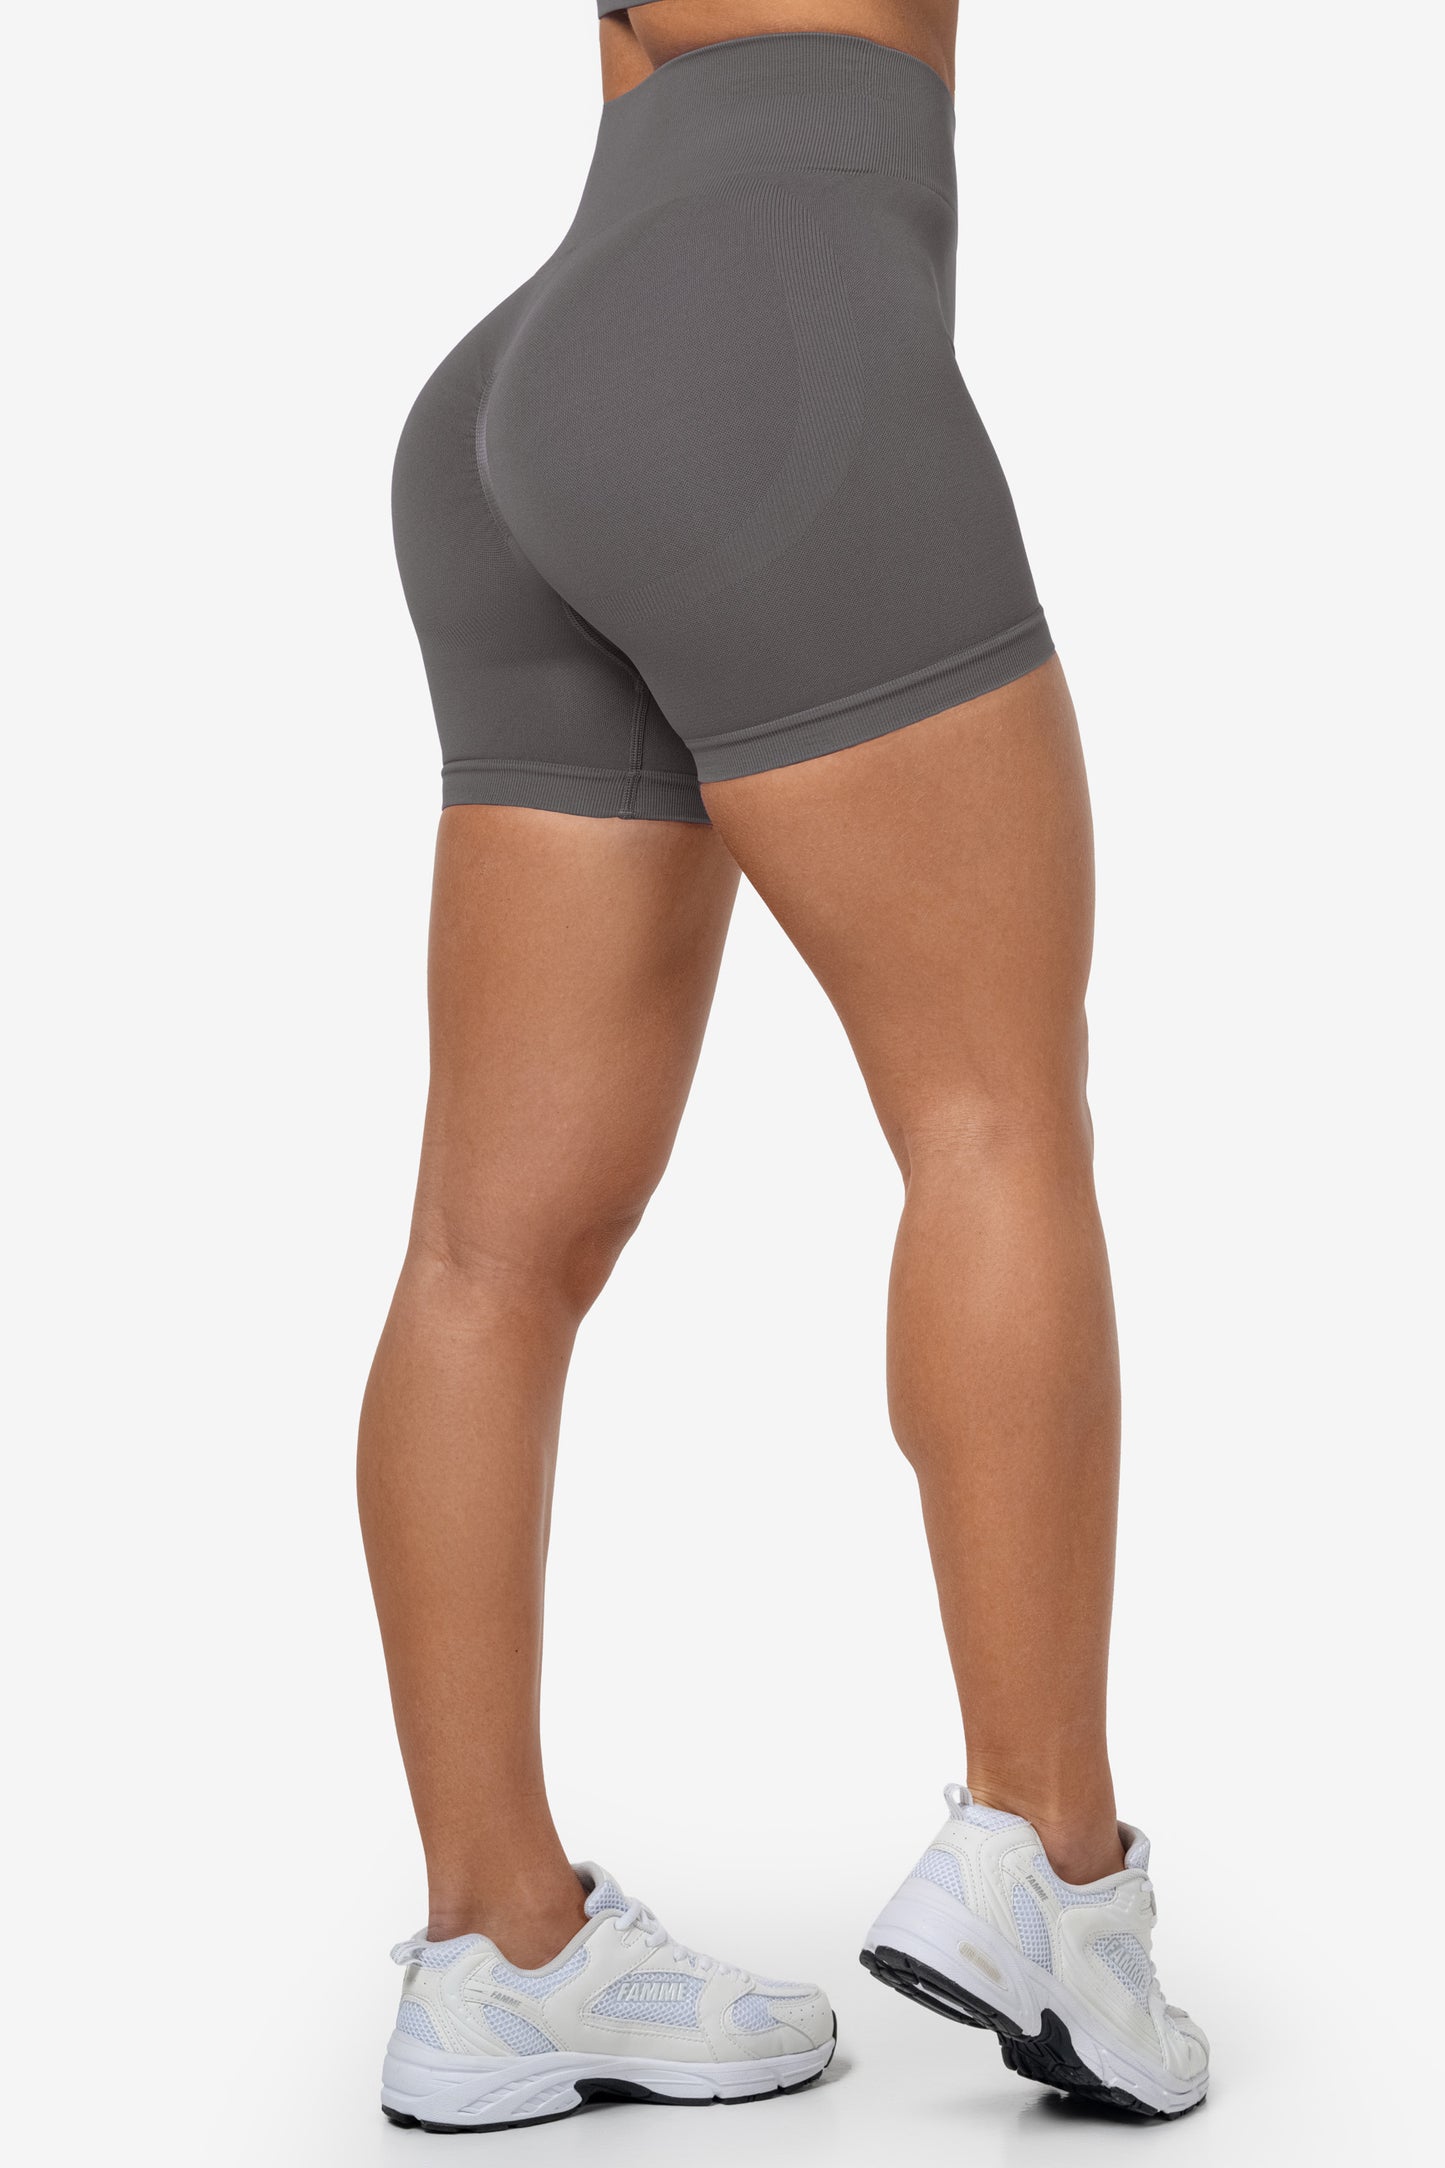 Grey Lunge Scrunch Shorts - for dame - Famme - Shorts